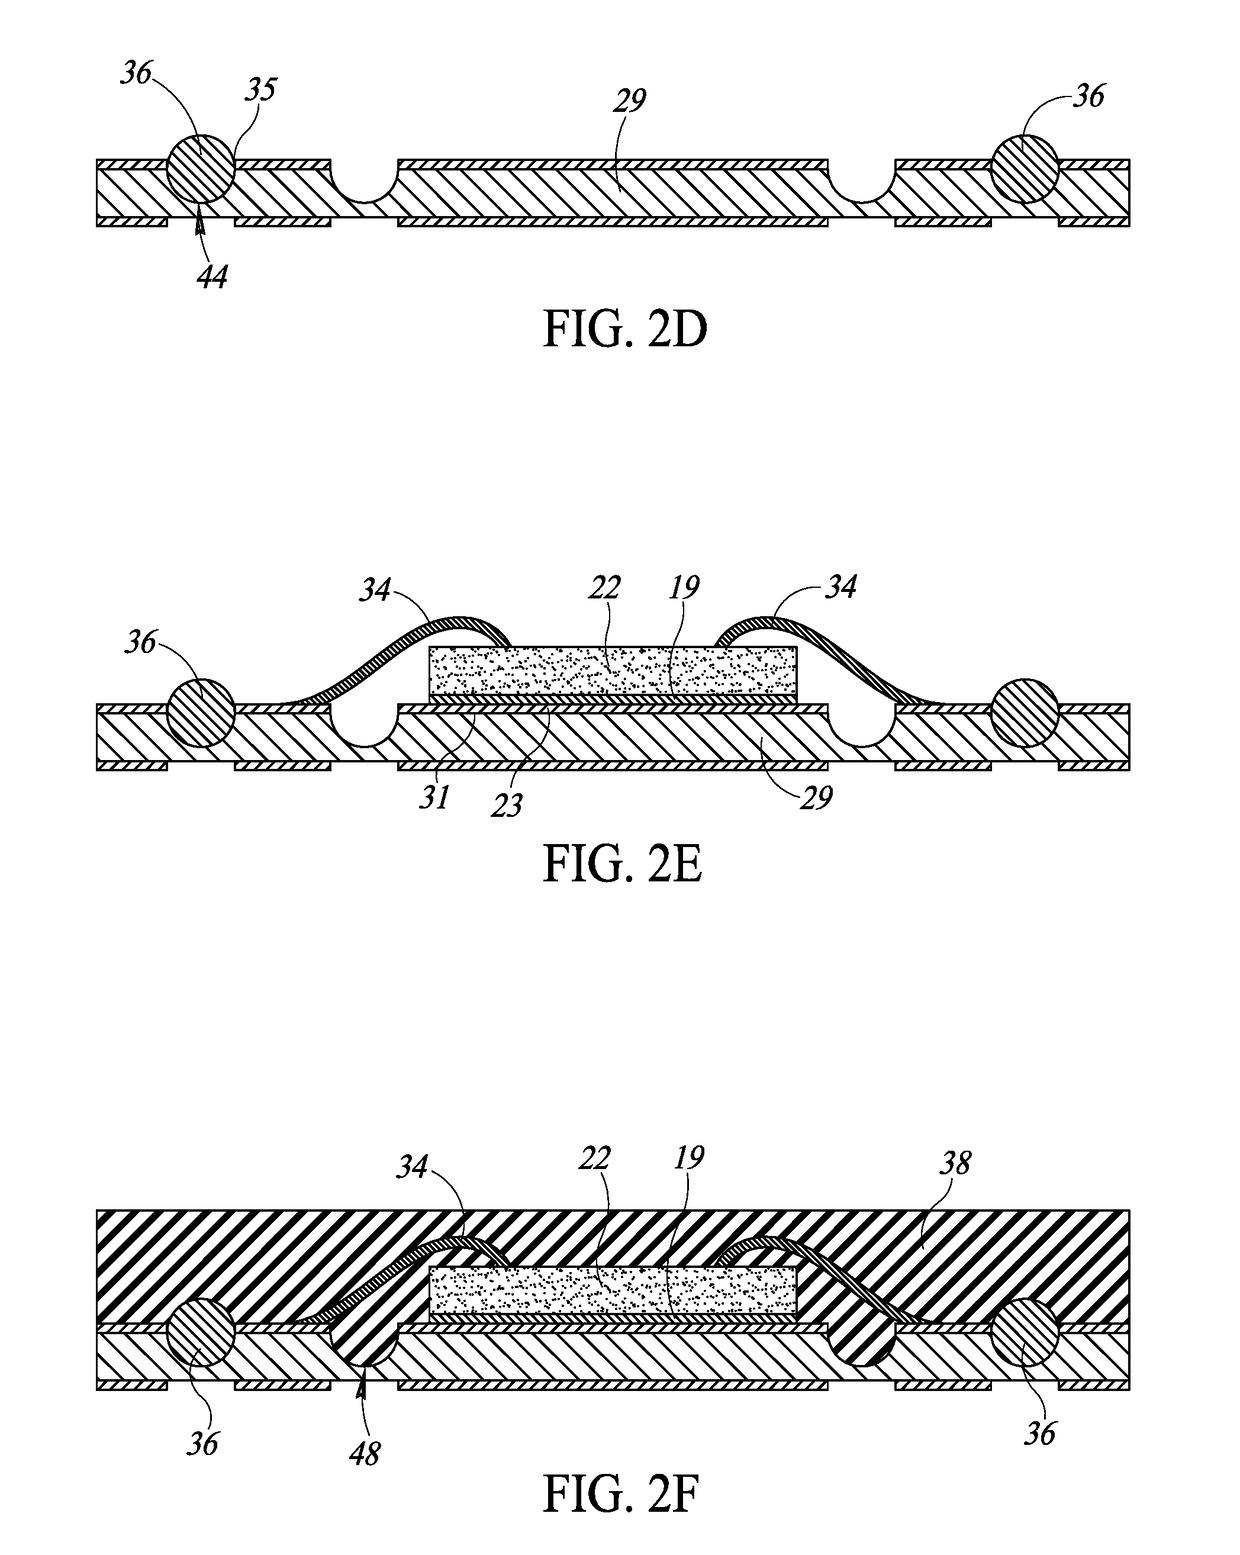 Leadframe package with side solder ball contact and method of manufacturing